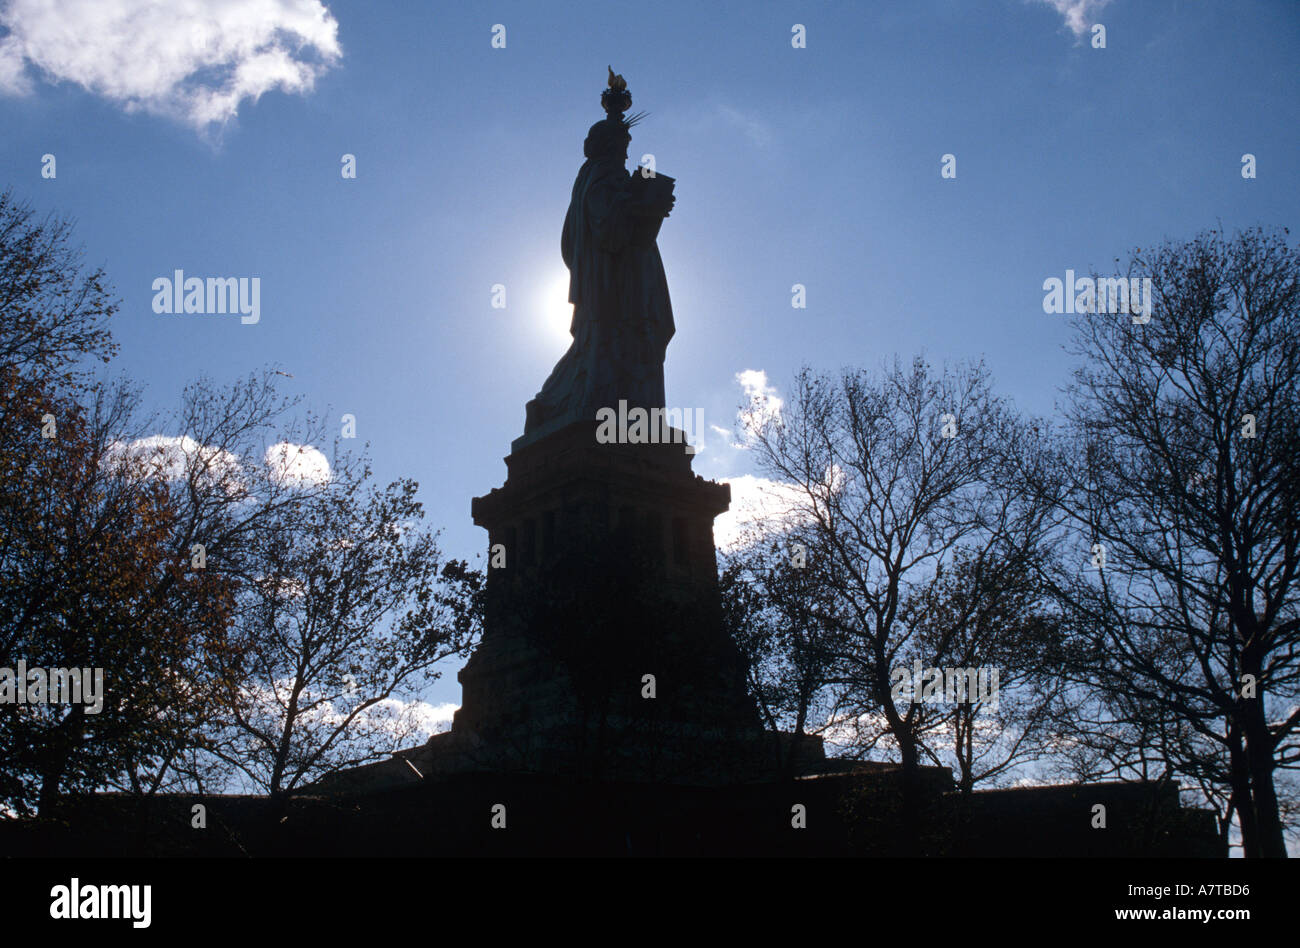 Silhouette of the Statue of Liberty Ellis Island New York United States of America Stock Photo